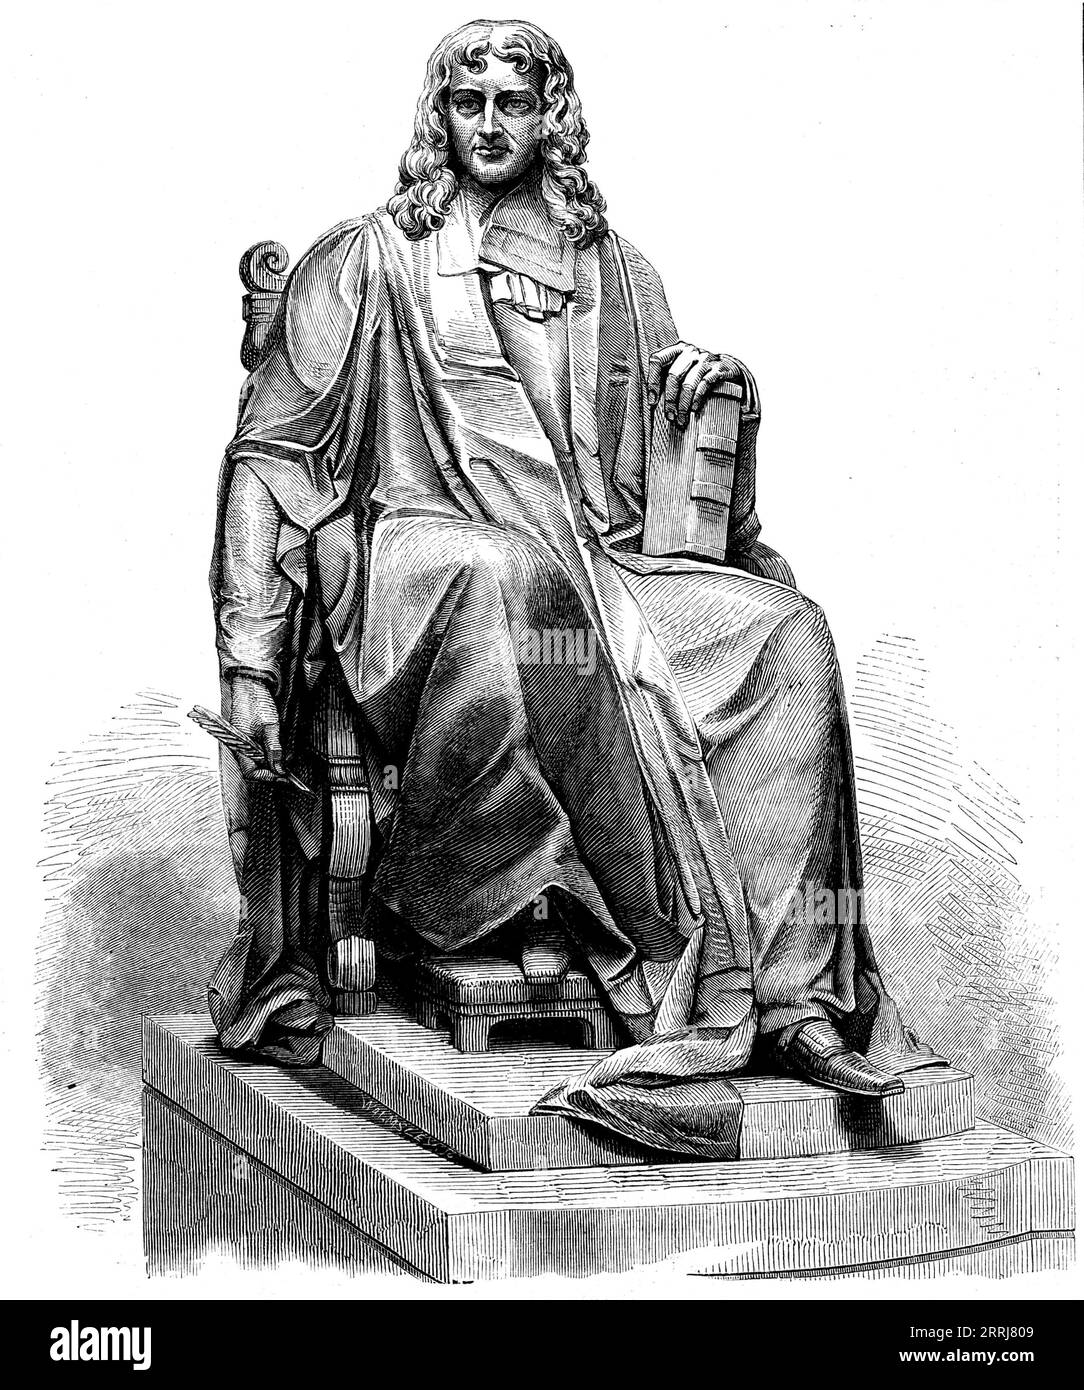 Statue of Dr. Isaac Barrow, inaugurated at Trinity College, Cambridge, on Tuesday last, 1858. This fine statue [in white marble]...was presented to the college by the Marquis of Lansdowne...&quot;The name of Dr. Barrow,&quot; says the Rev. Mr. Granger, &quot;will be ever illustrious for strength of mind, and a compass of knowledge that did honour to his country. In mathematical learning he was excelled only by one man, and that was his pupil, the great Sir Isaac Newton.&quot; He preceded Newton in the mathematical chair at Cambridge...Barrow was, indeed, a profound scholar and energetic writer Stock Photo